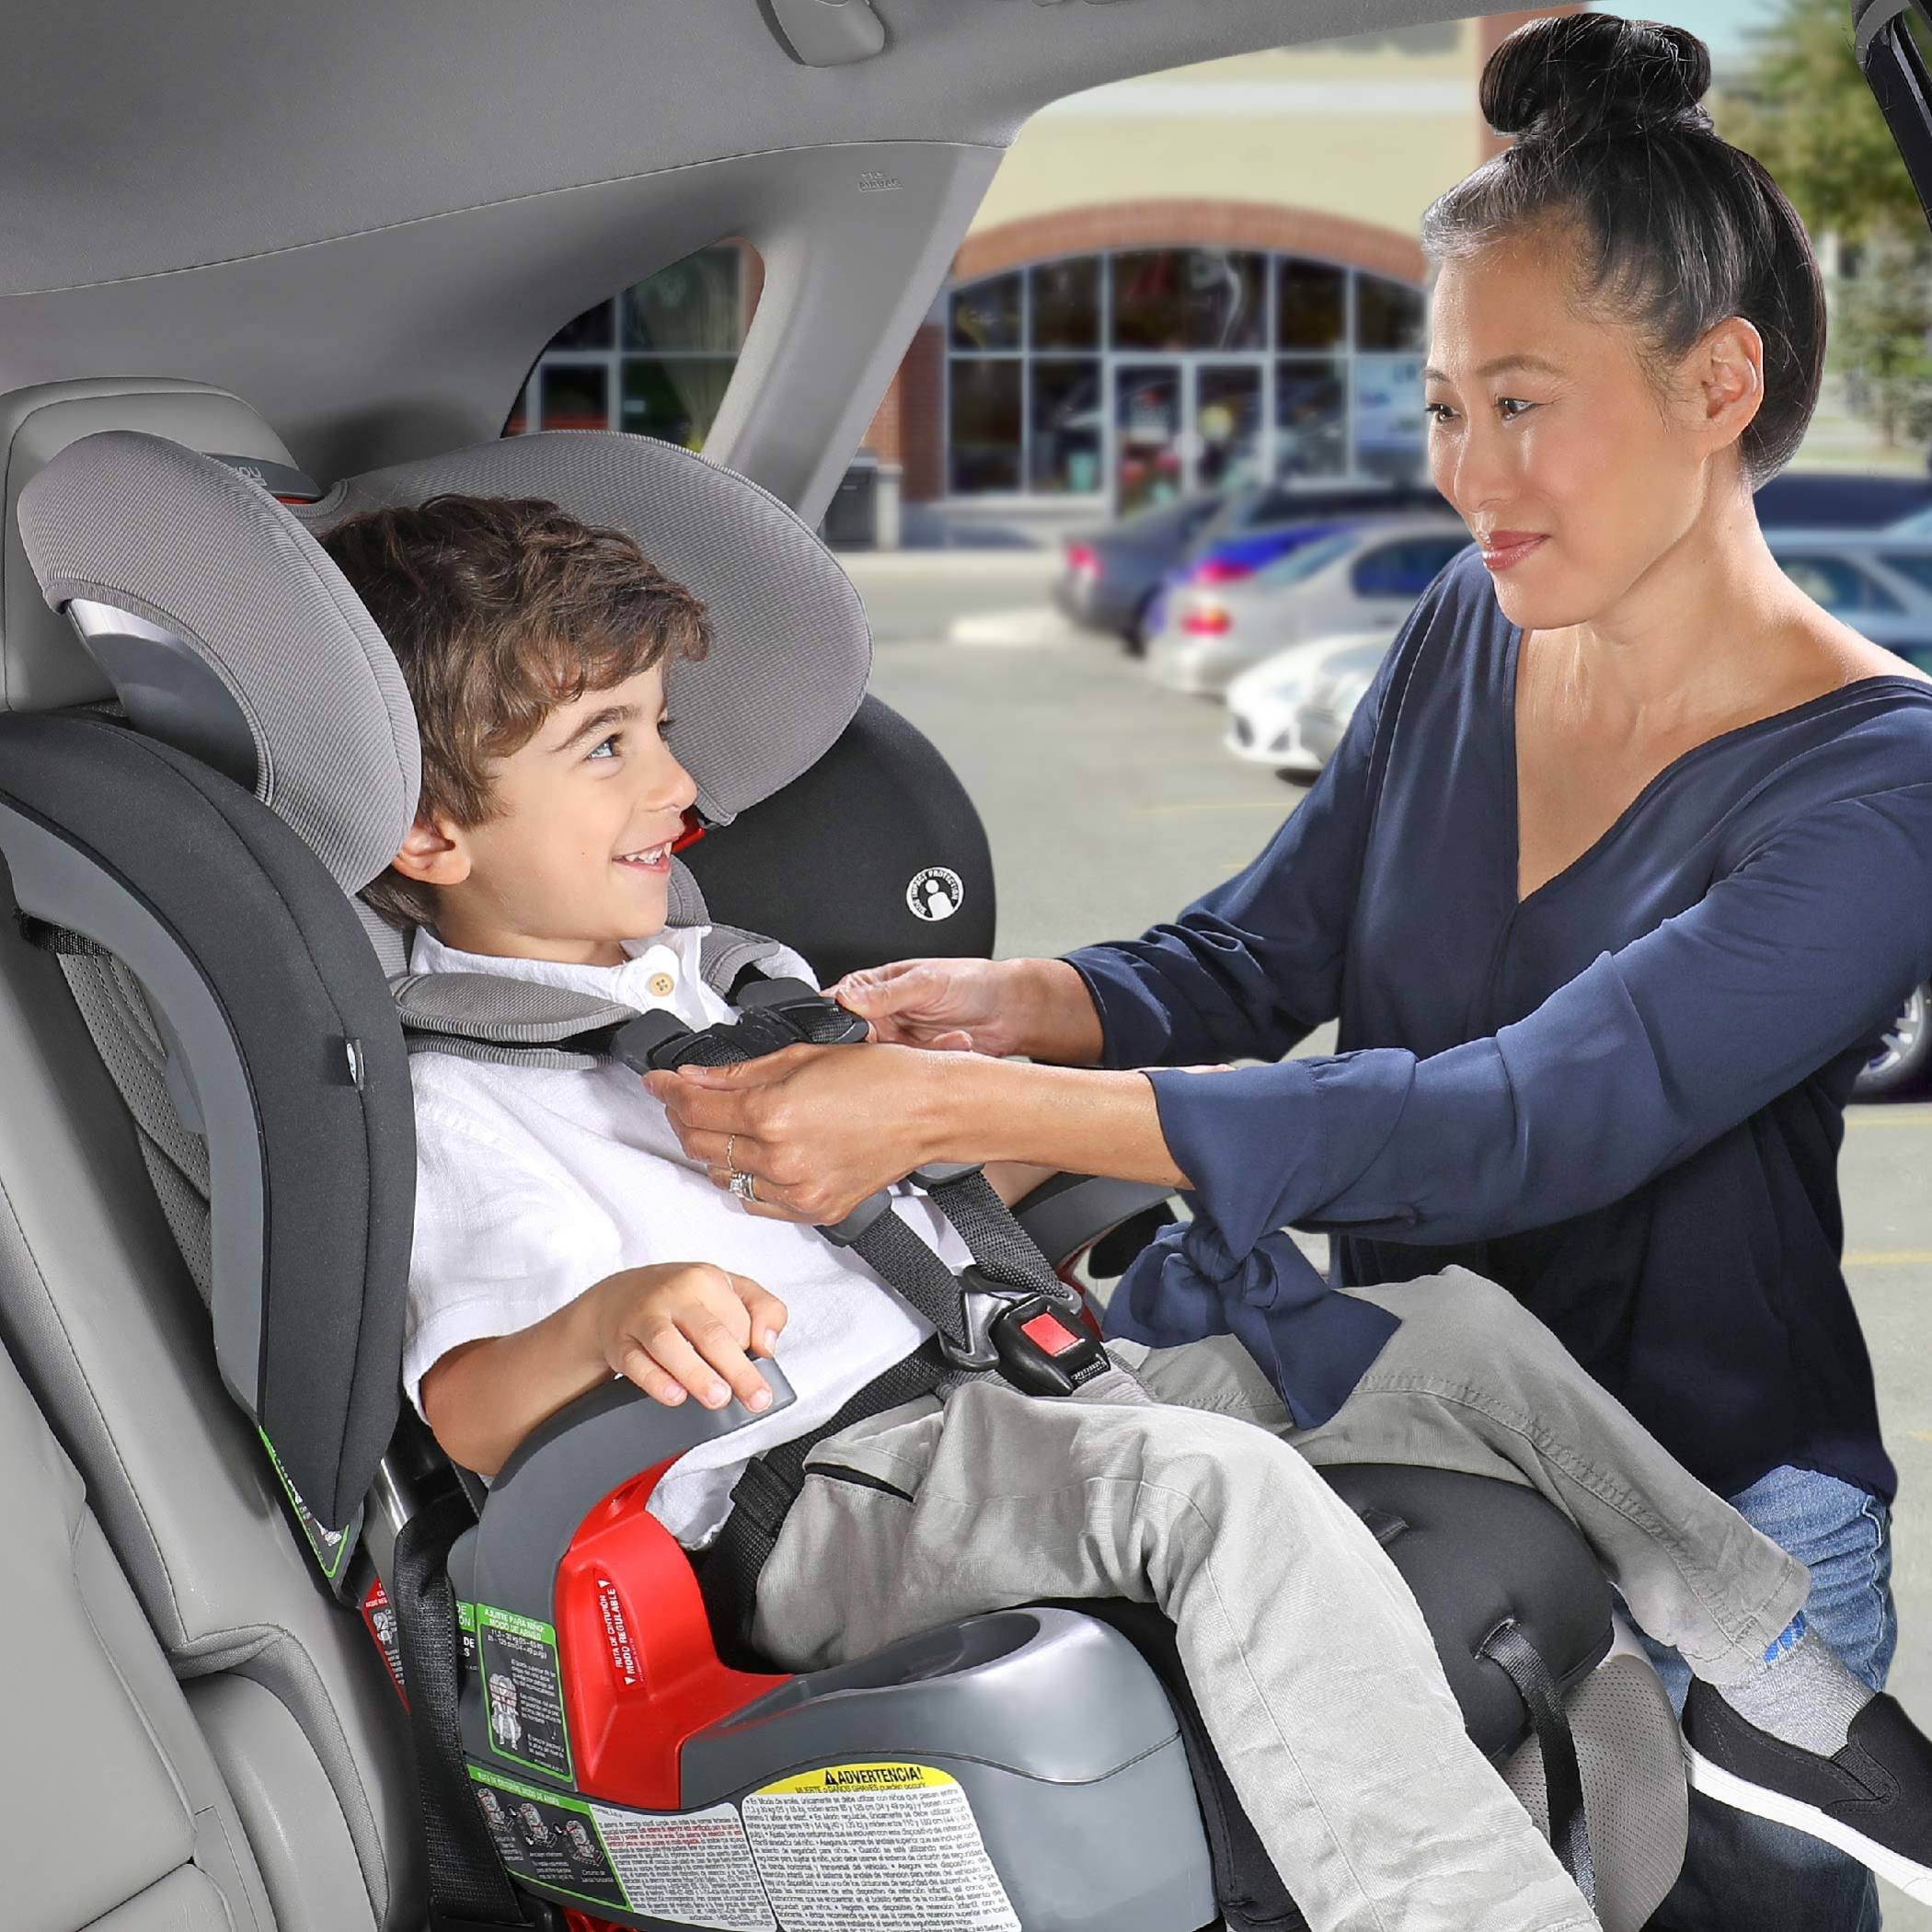 Mother adjusting the Harness on her childs car seat